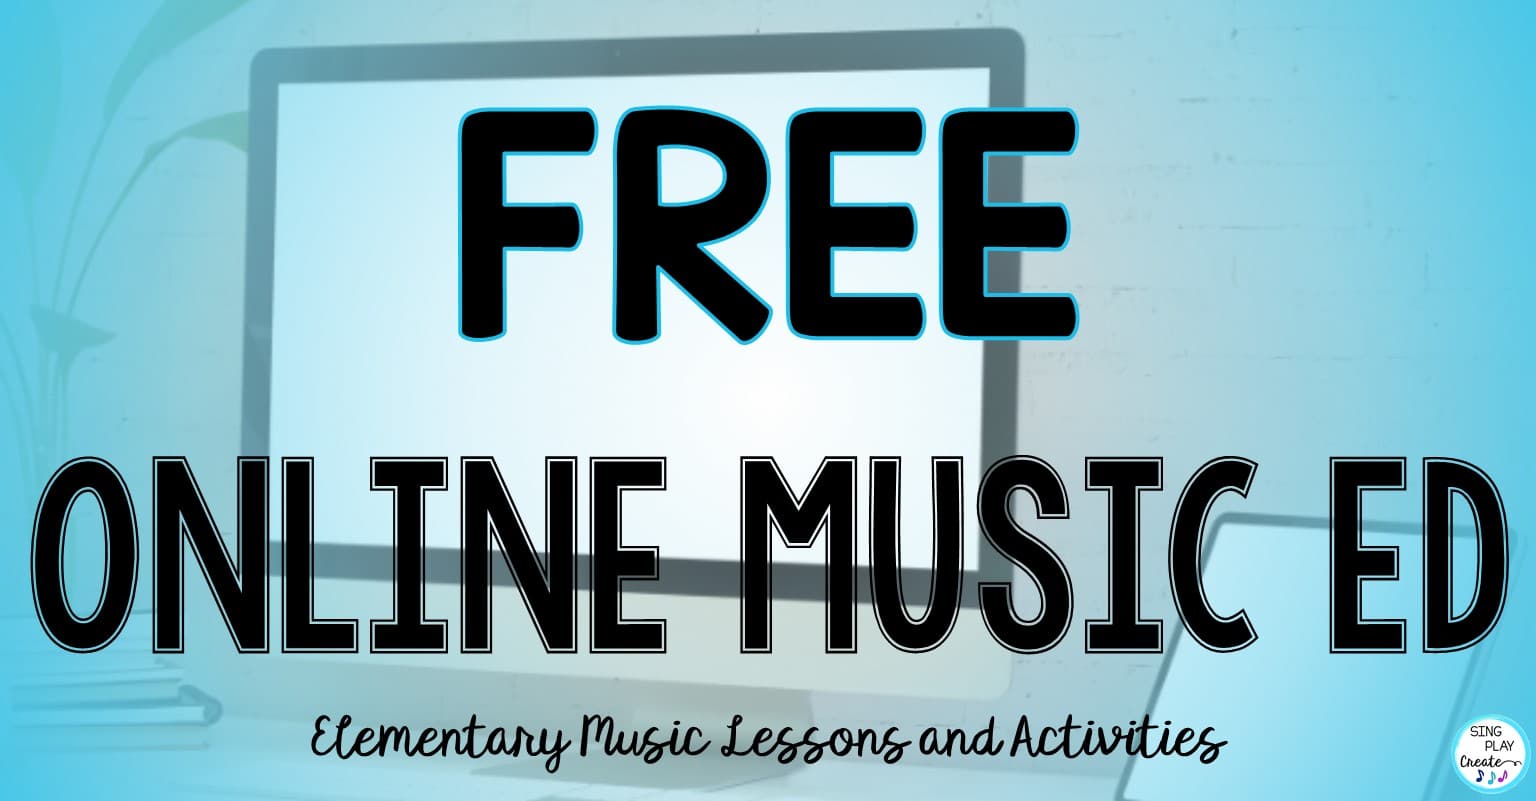 You are currently viewing Elementary Music Class Online Music Lessons